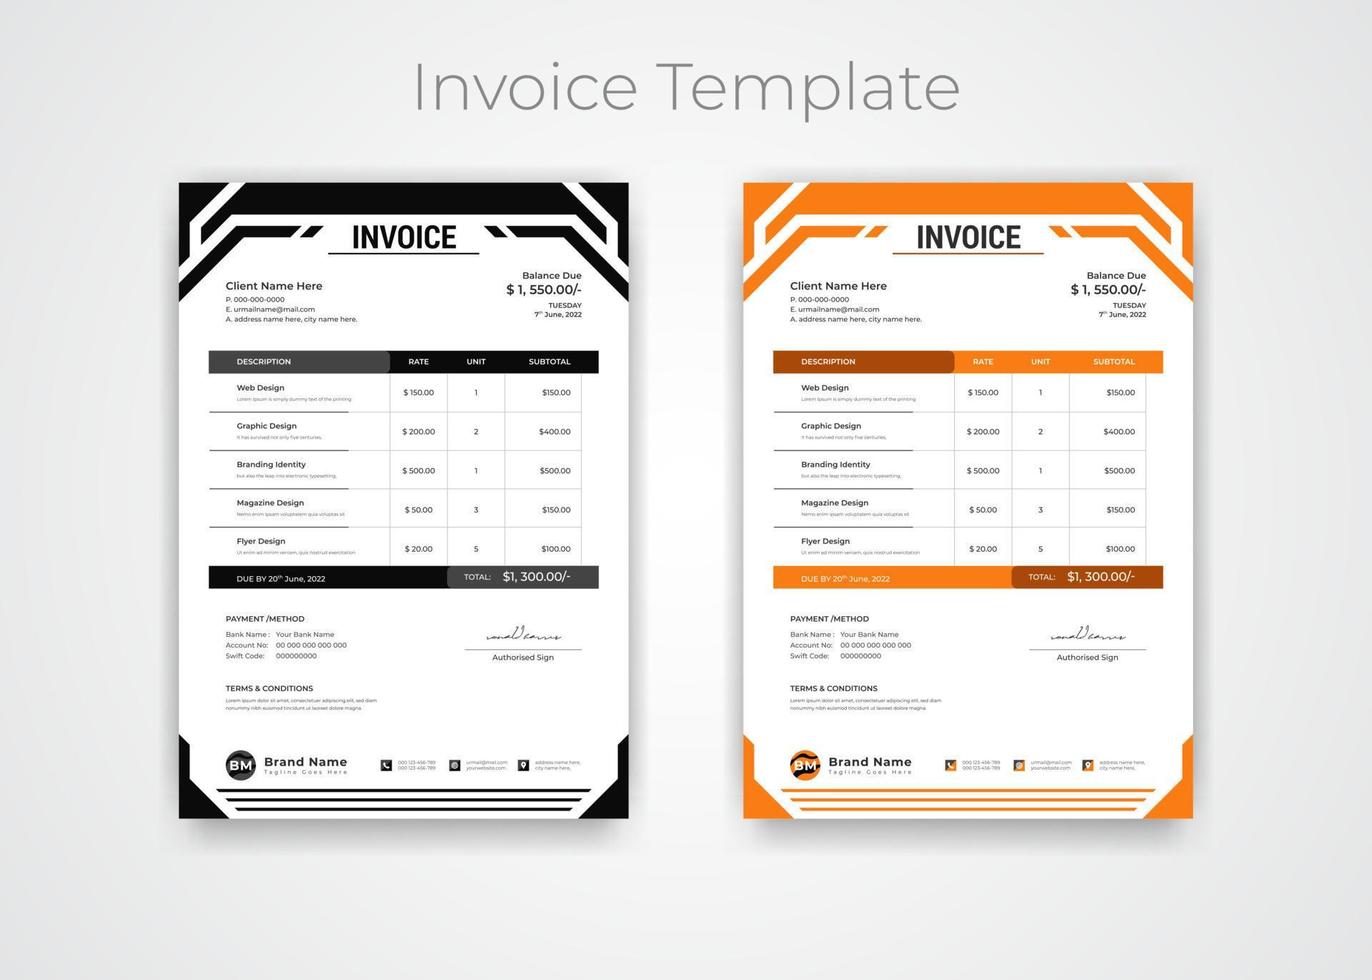 Abstract modern minimalist style business invoice template. Quotation Invoice Layout Template Paper Sheet Include Accounting, Price, Tax, and Quantity. With color variation Vector illustration